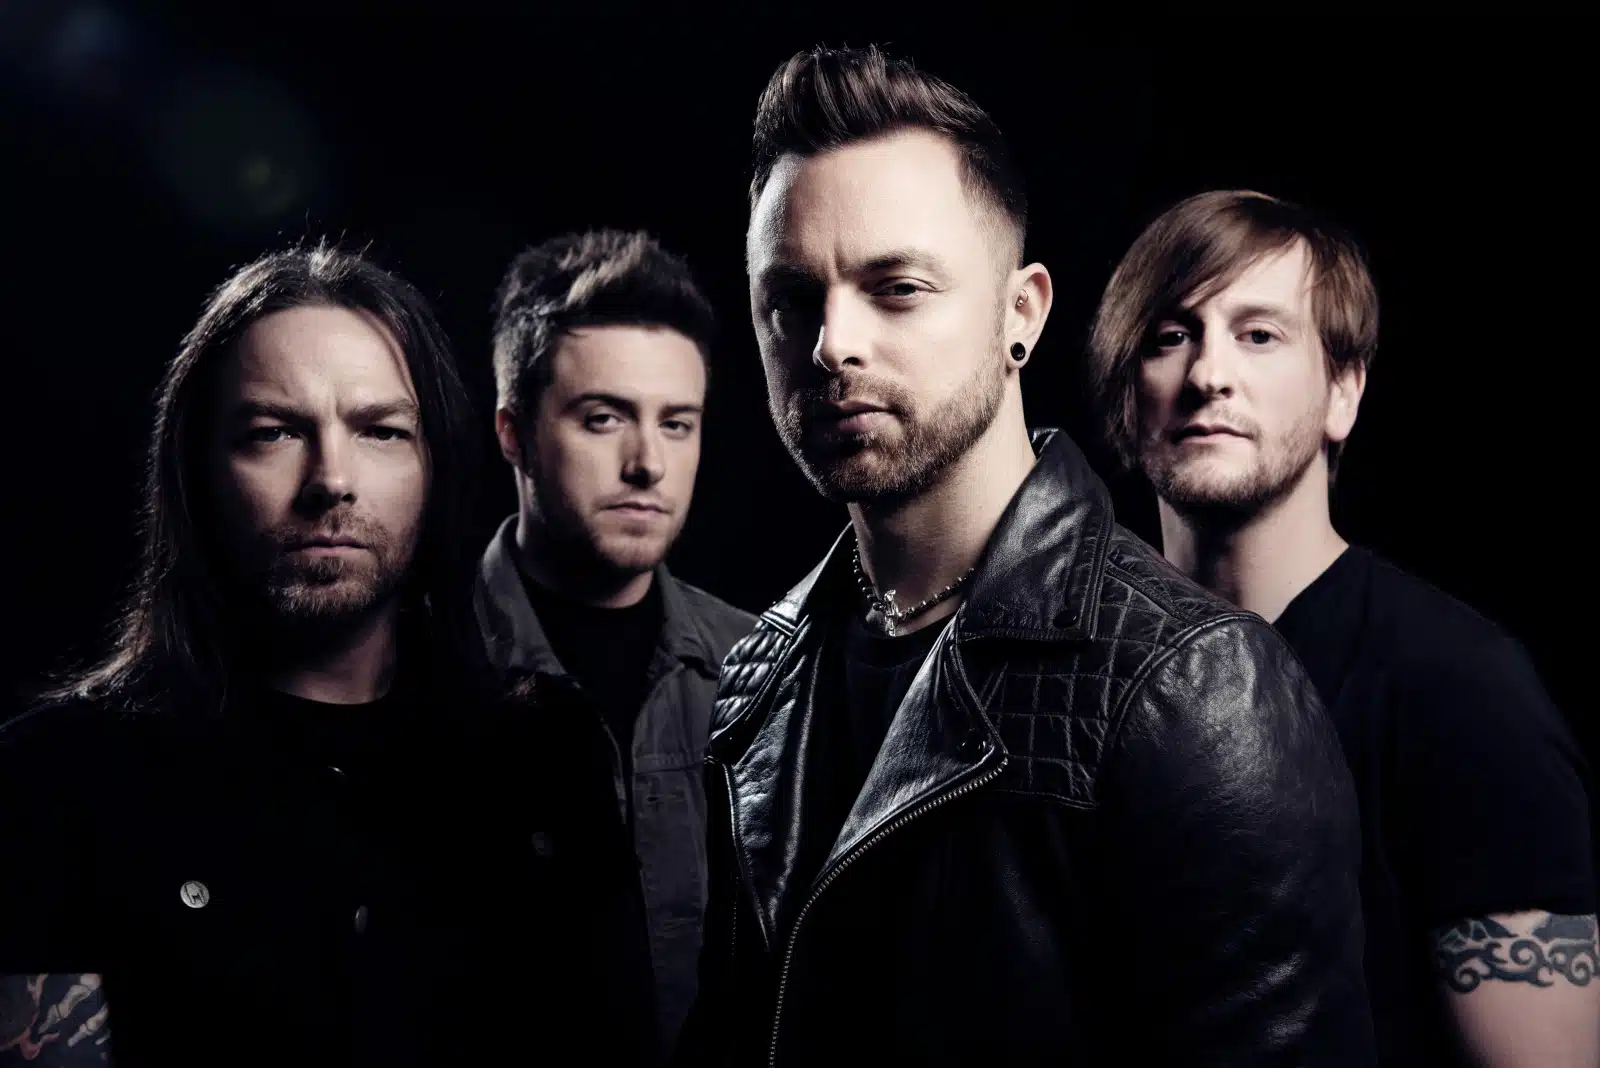 Bullet for My Valentine Songs Ranked